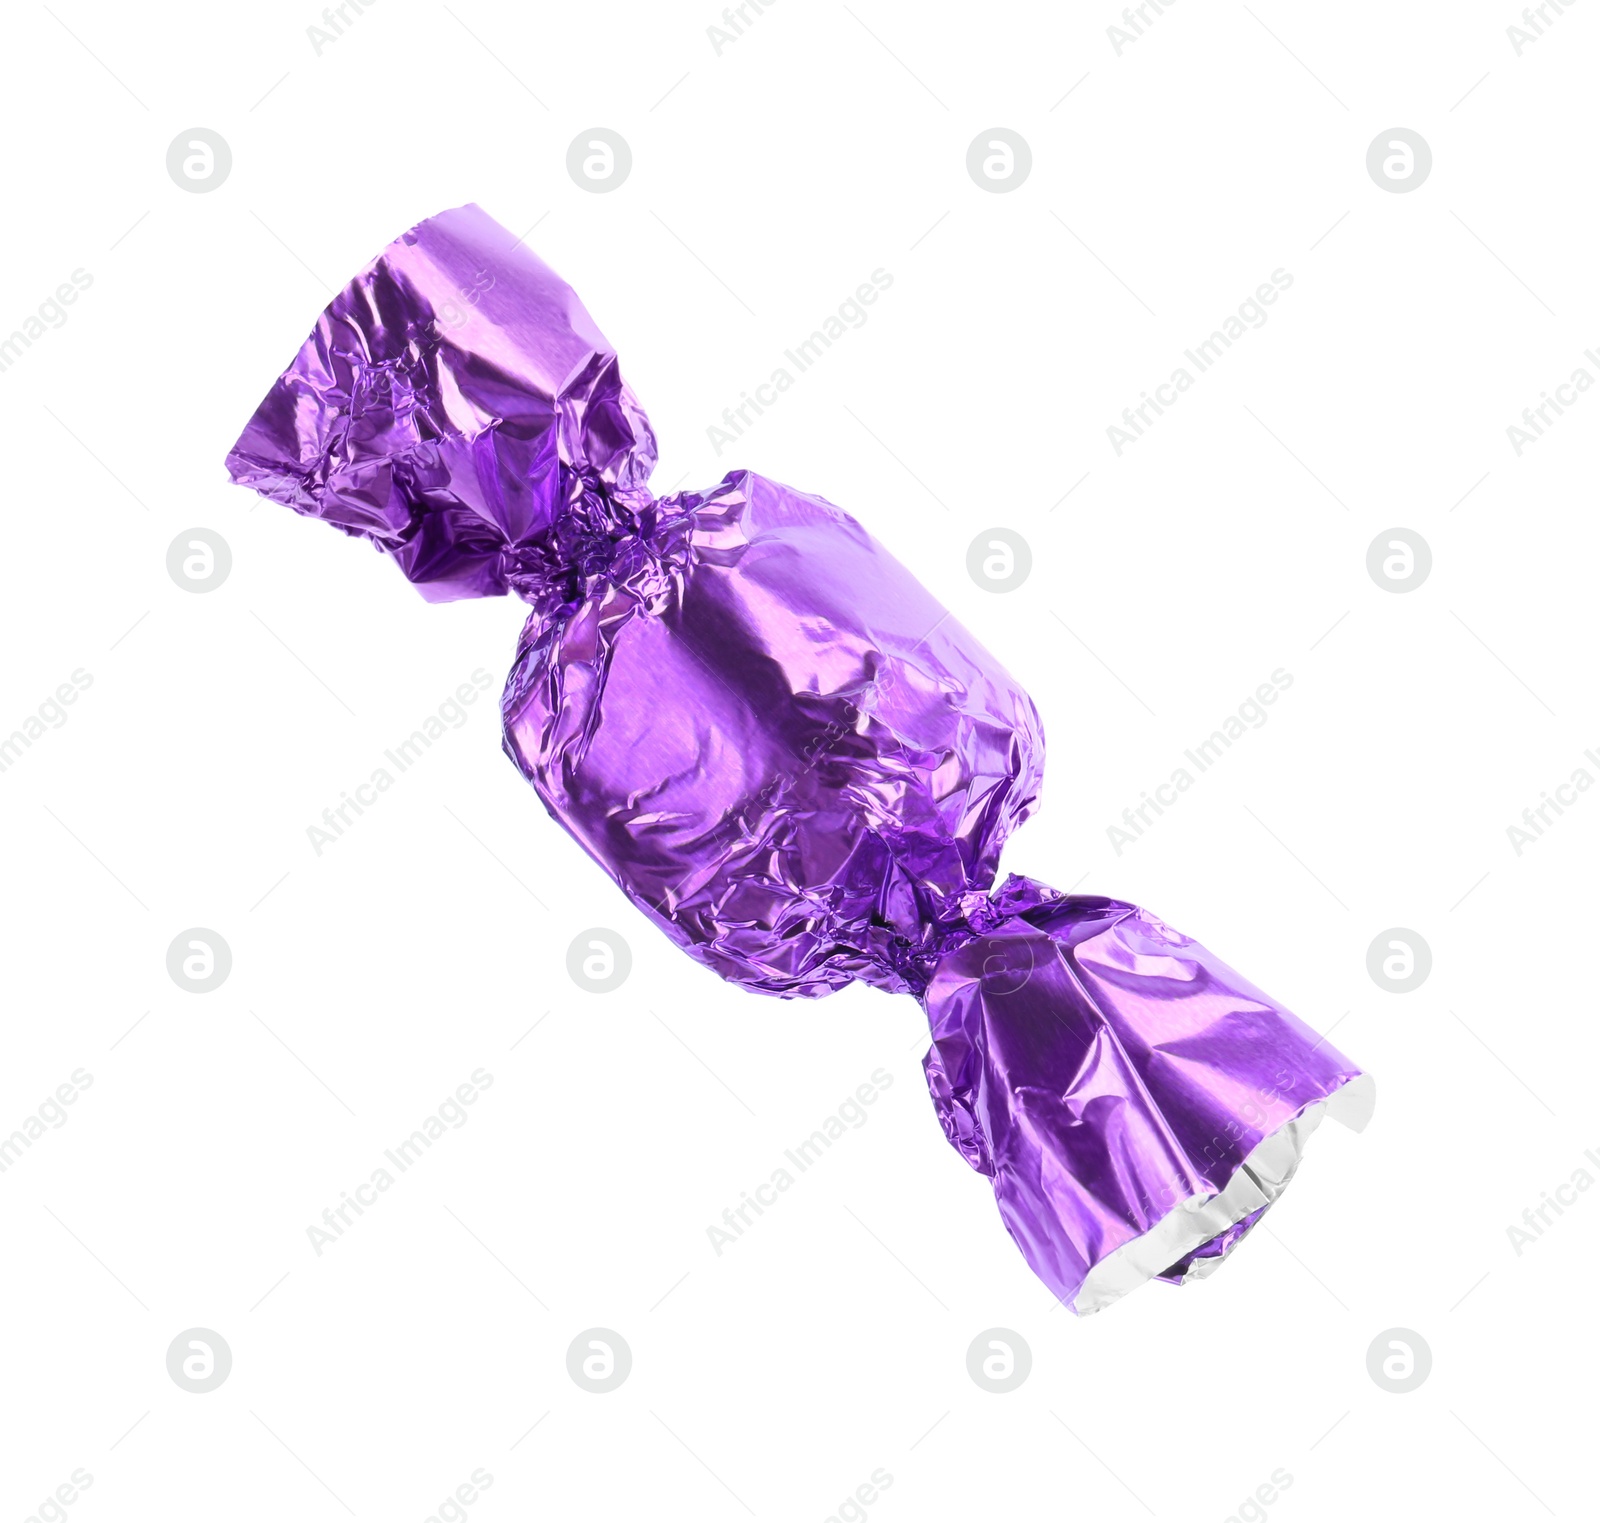 Photo of Tasty candy in purple wrapper isolated on white